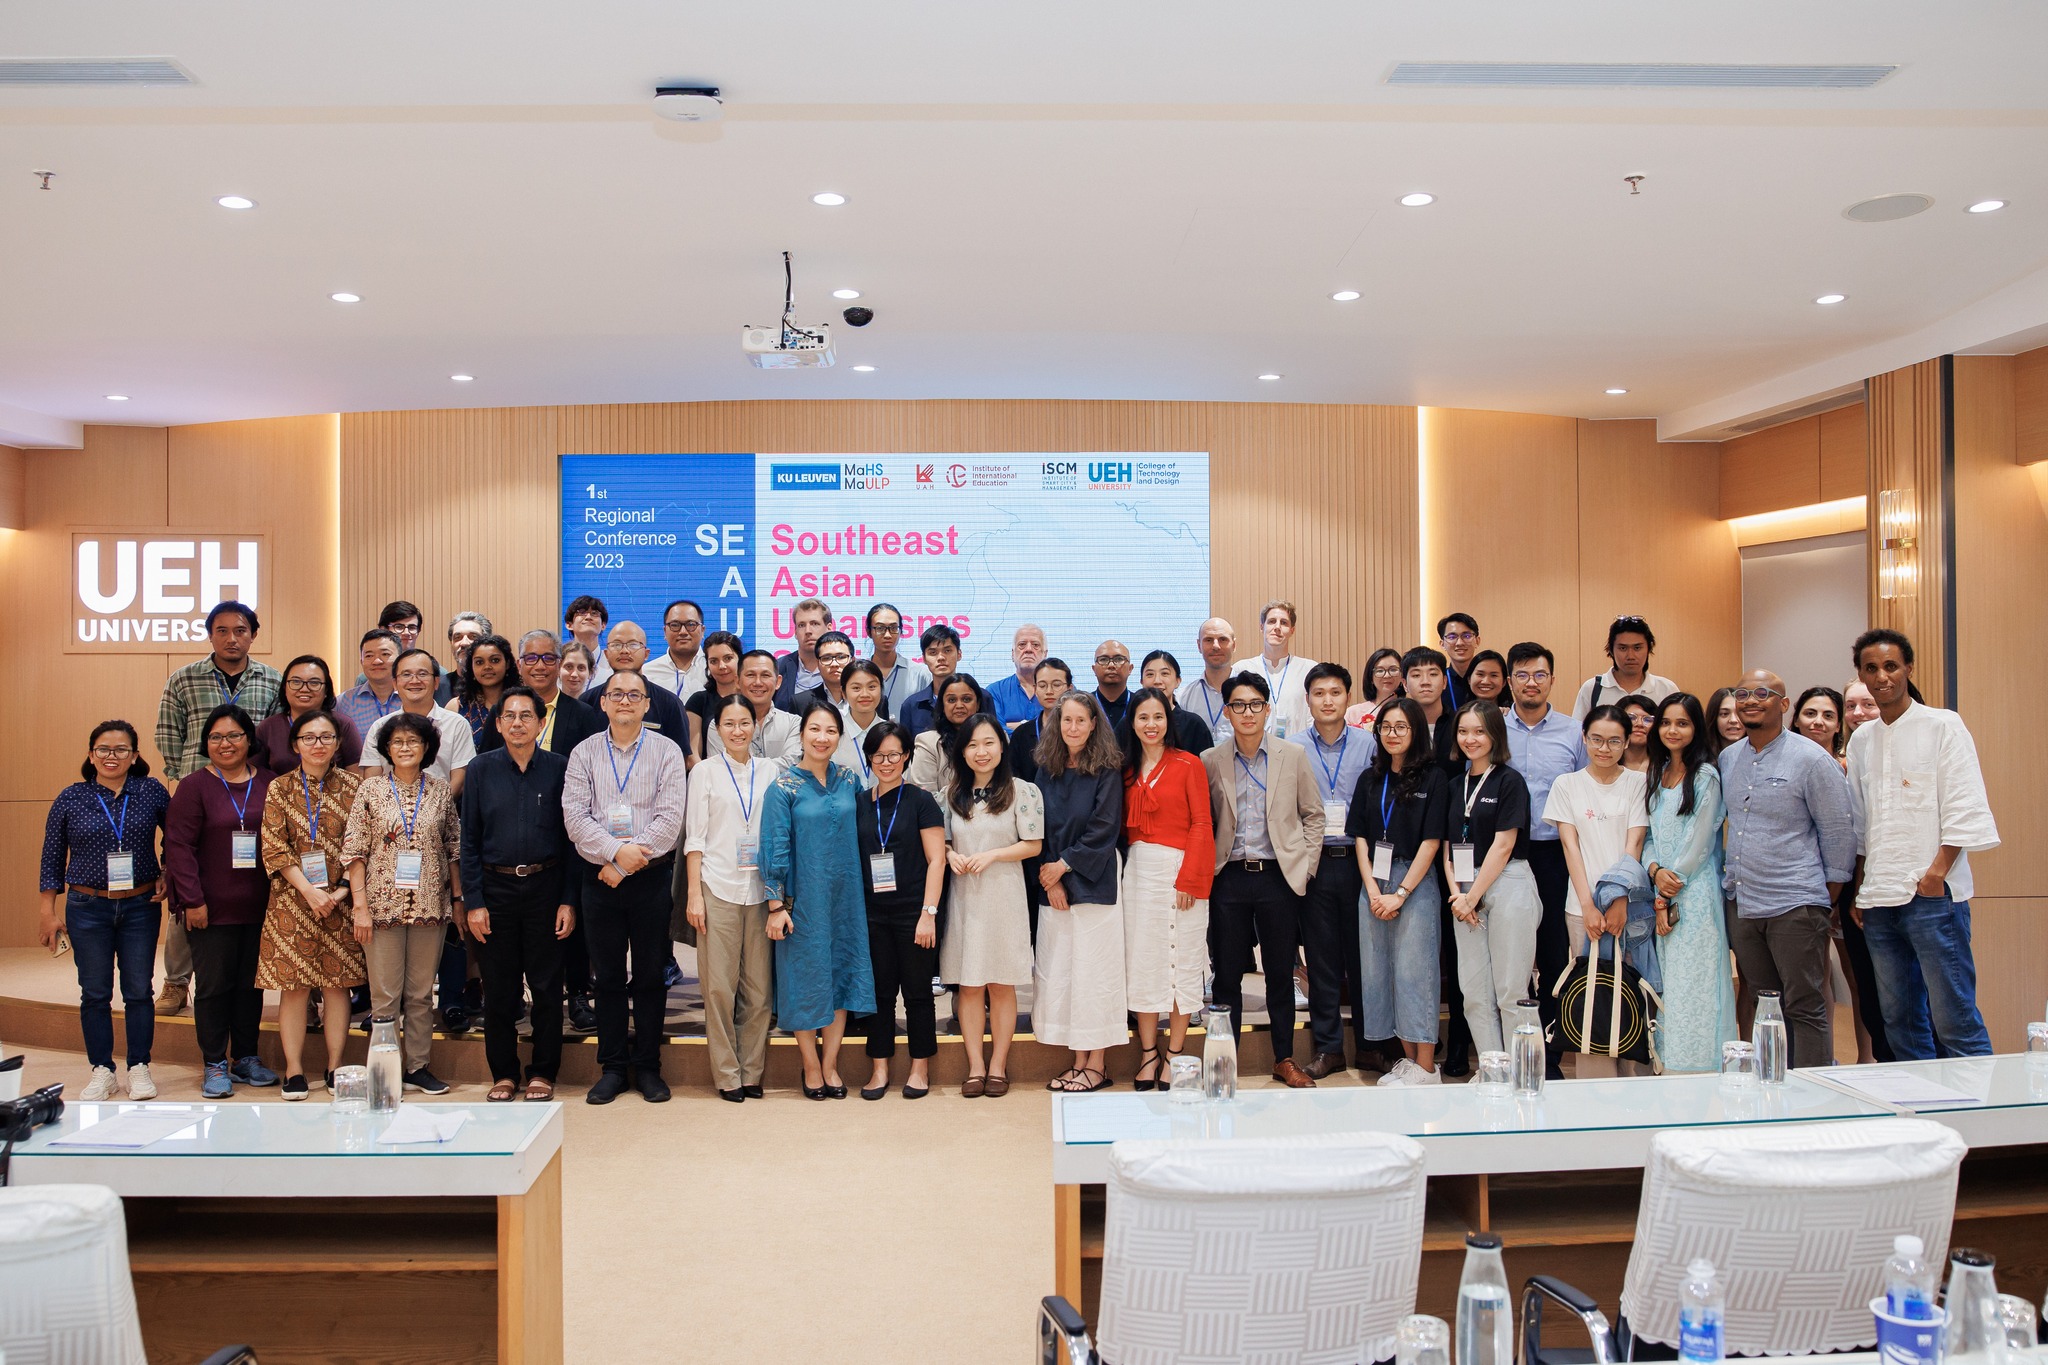 A LOOK AT SEAUS INTERNATIONAL SCIENCE CONFERENCE 2023: URBAN DESIGN SOLUTIONS IN SOUTHEAST ASIA TO SOLVE GLOBAL Warming